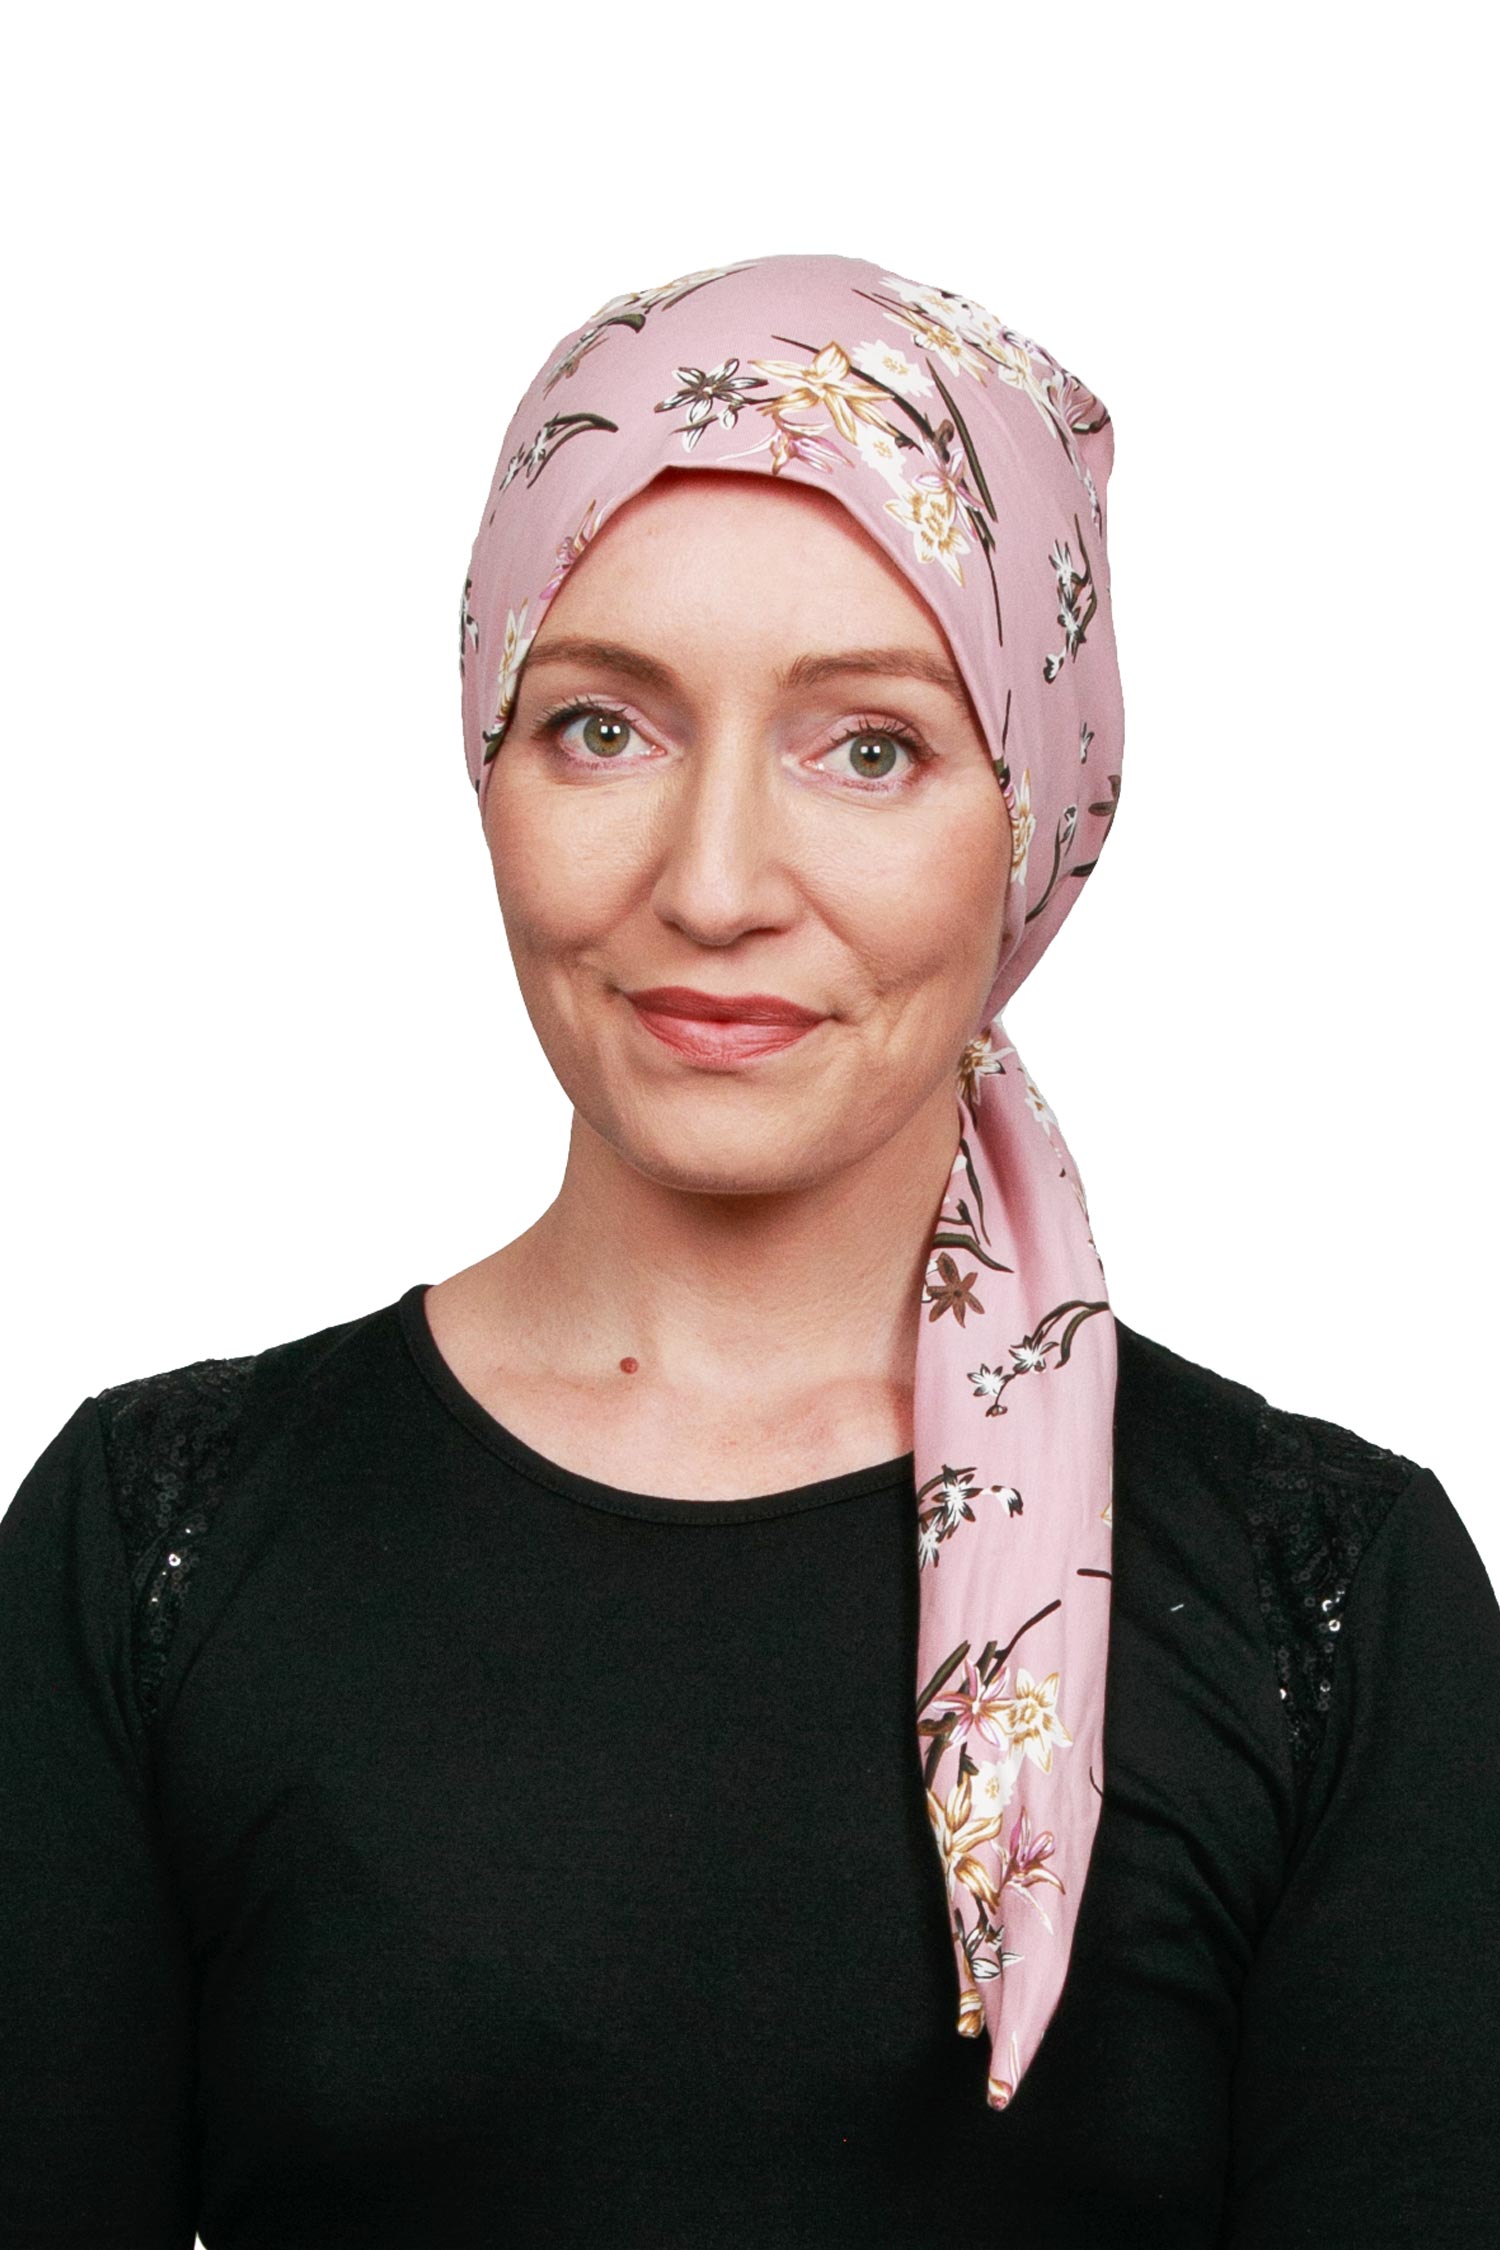 Aster 2 Cancer Wrap Hat - Pink - Kaus Hats